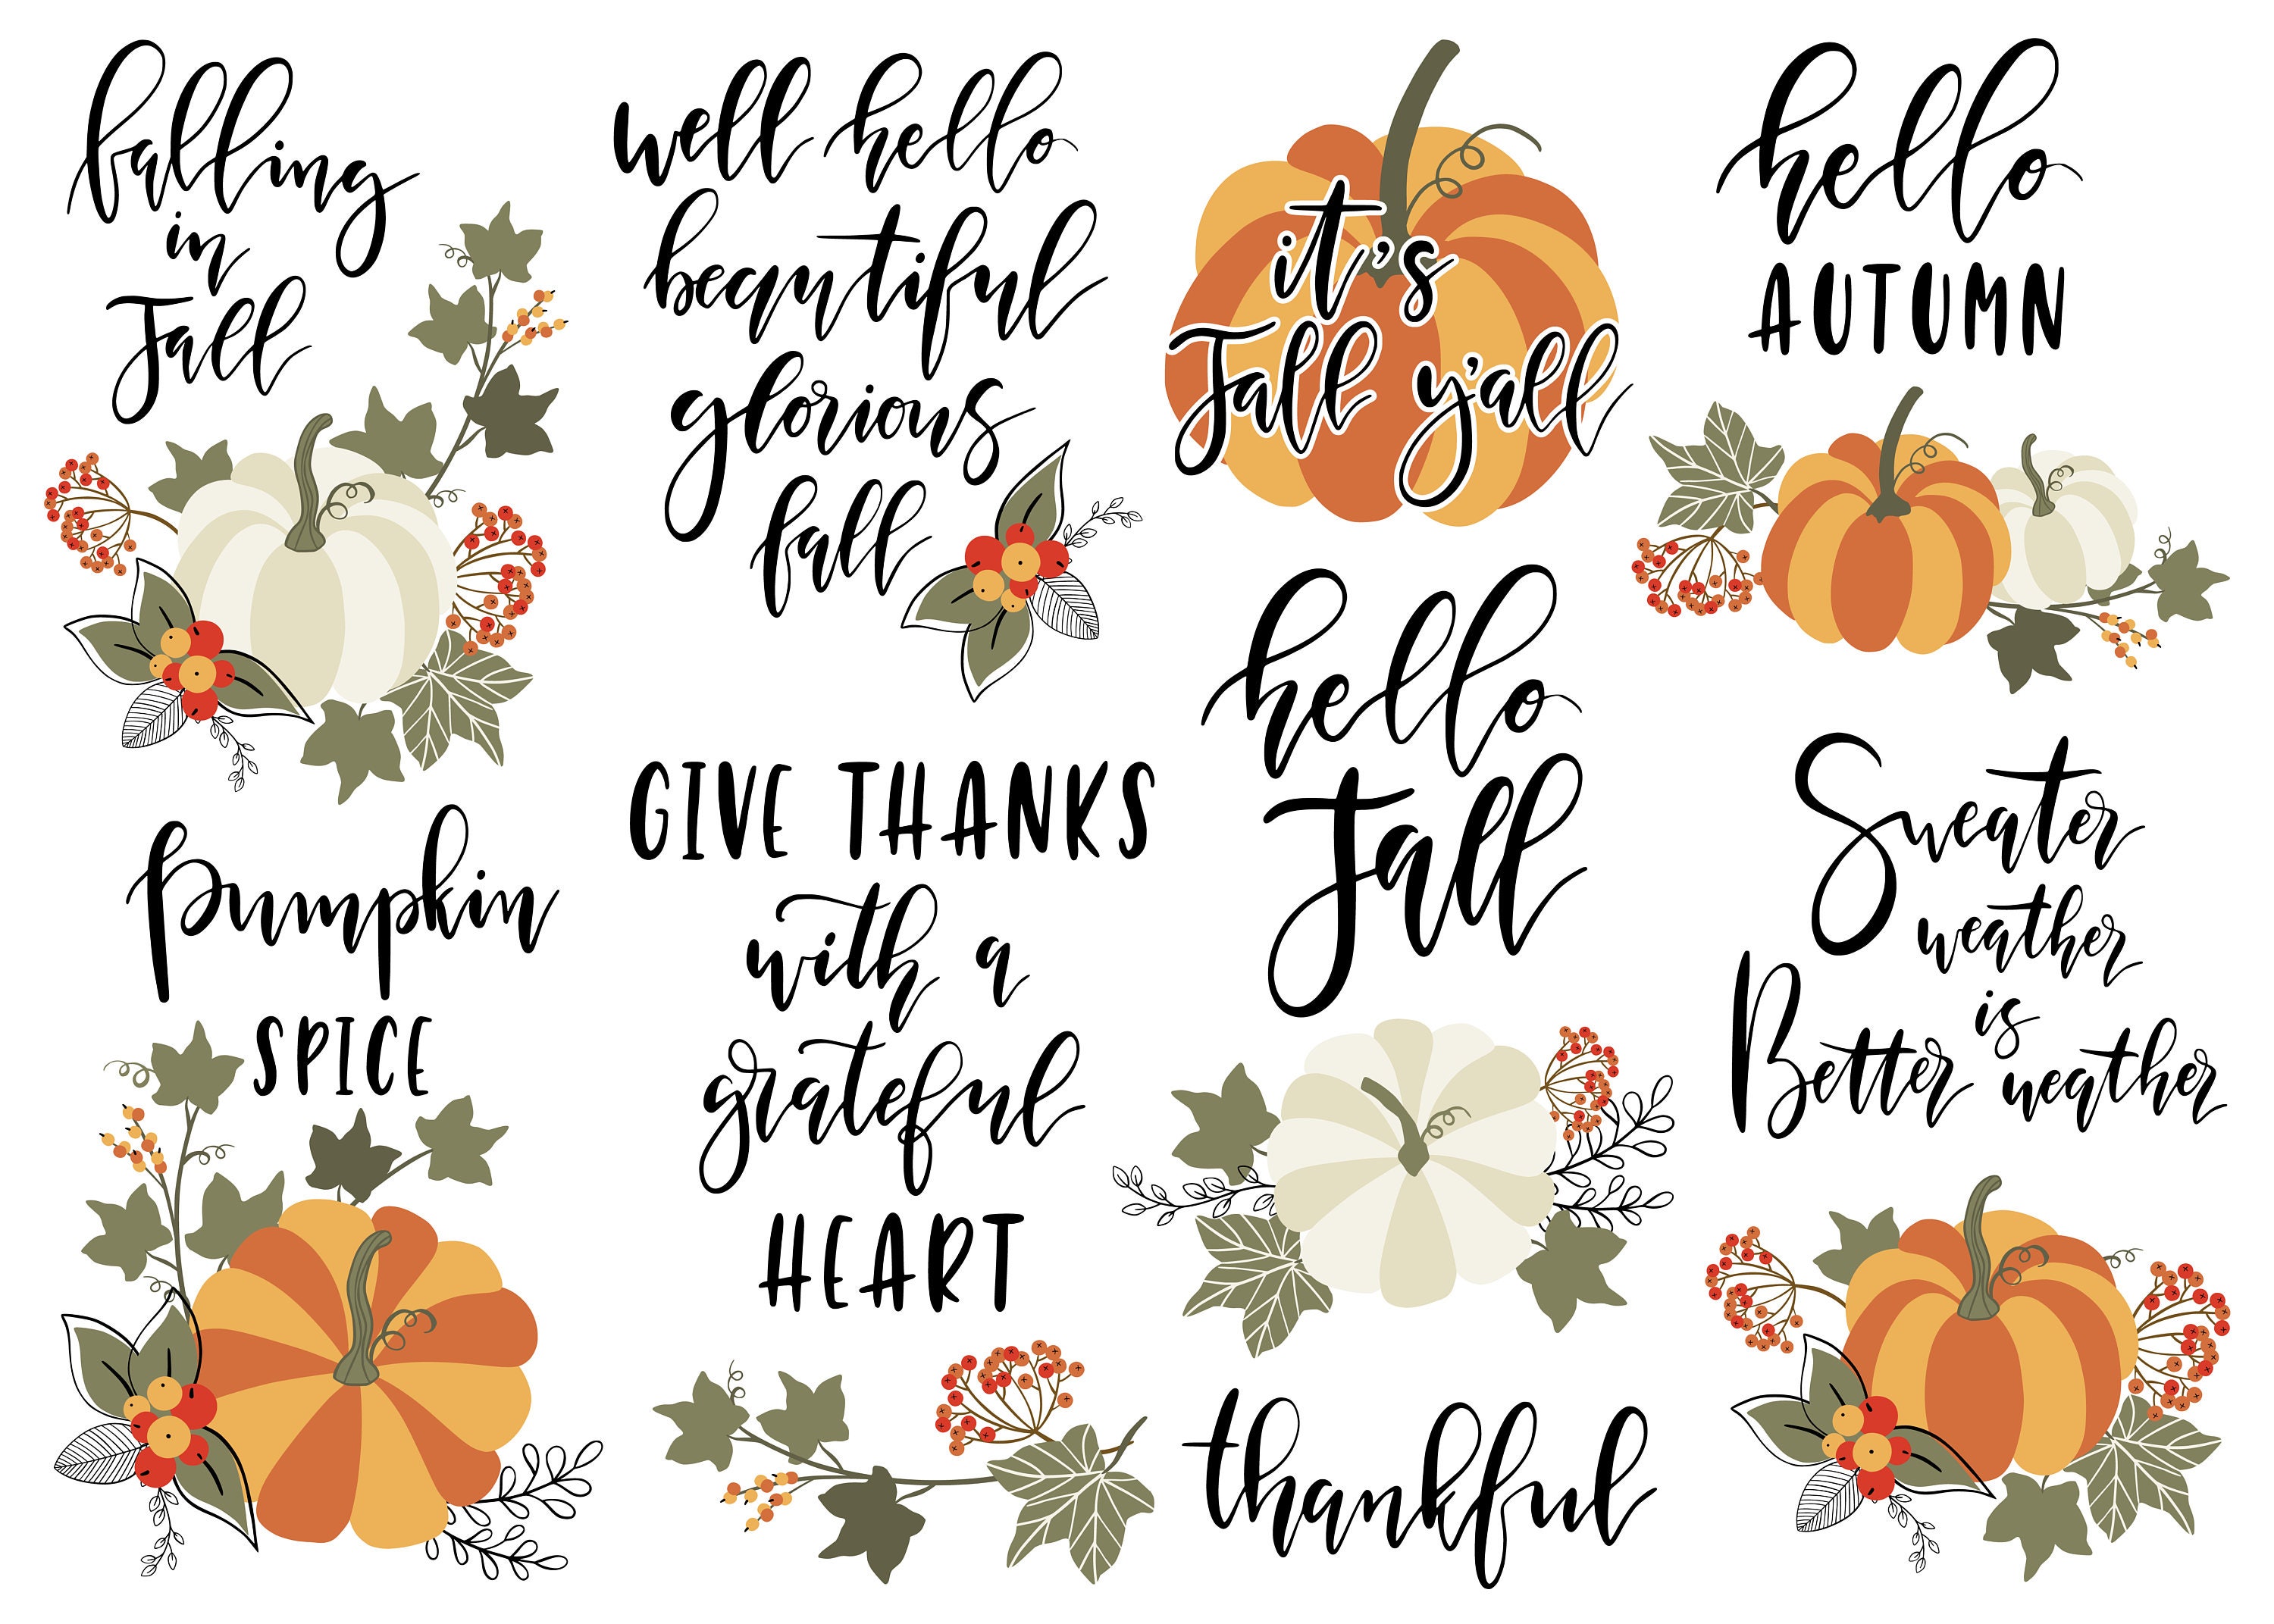 Autumn / fall / lettering / quote / clipart / pumpkin